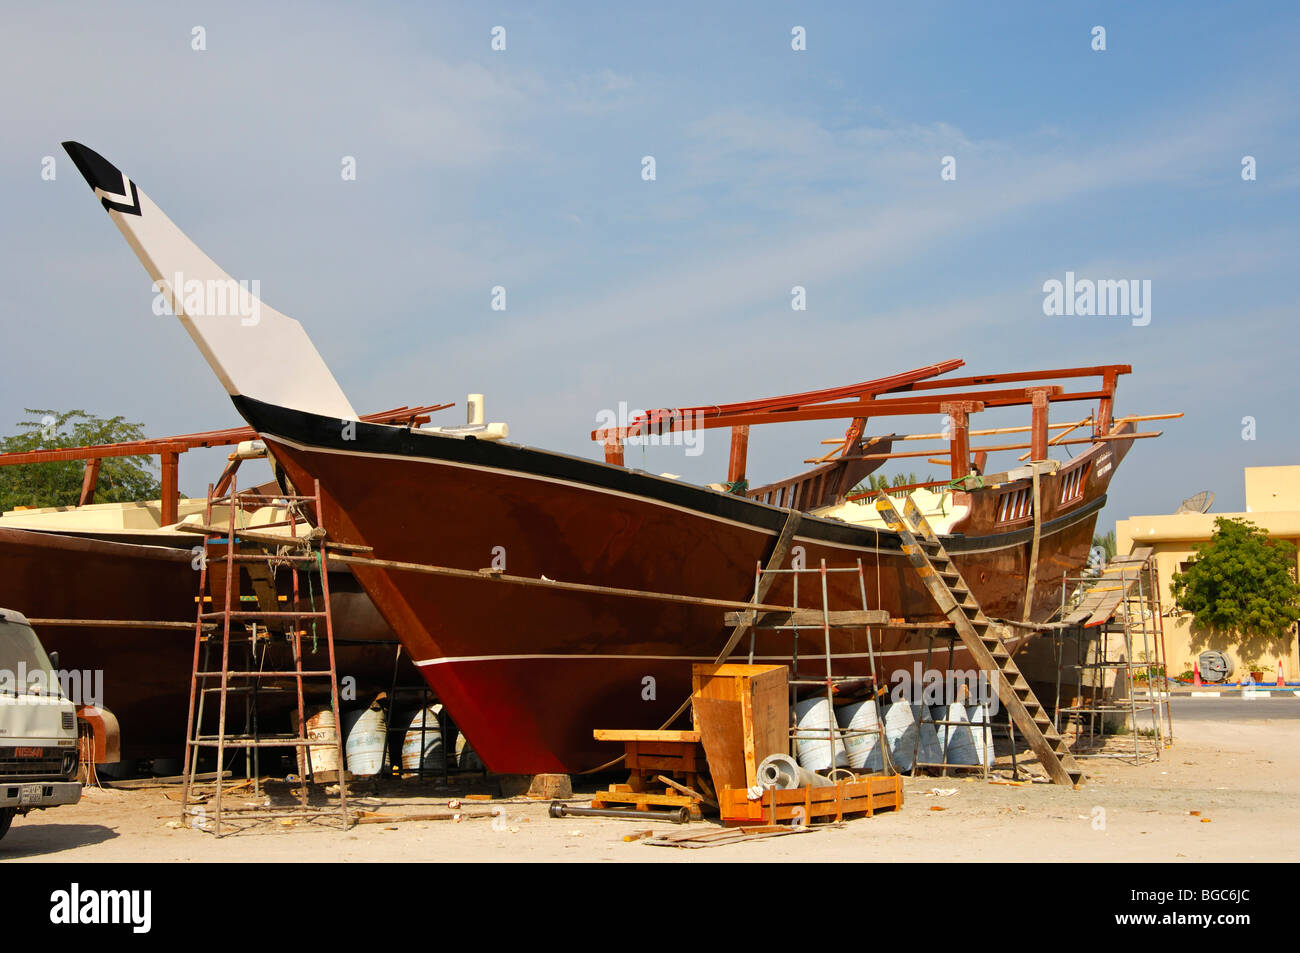 Glass fiber dhow at a shipyard for dhows in modern plastic construction in Ajman, Ajman Emirate, United Arab Emirates, Middle E Stock Photo